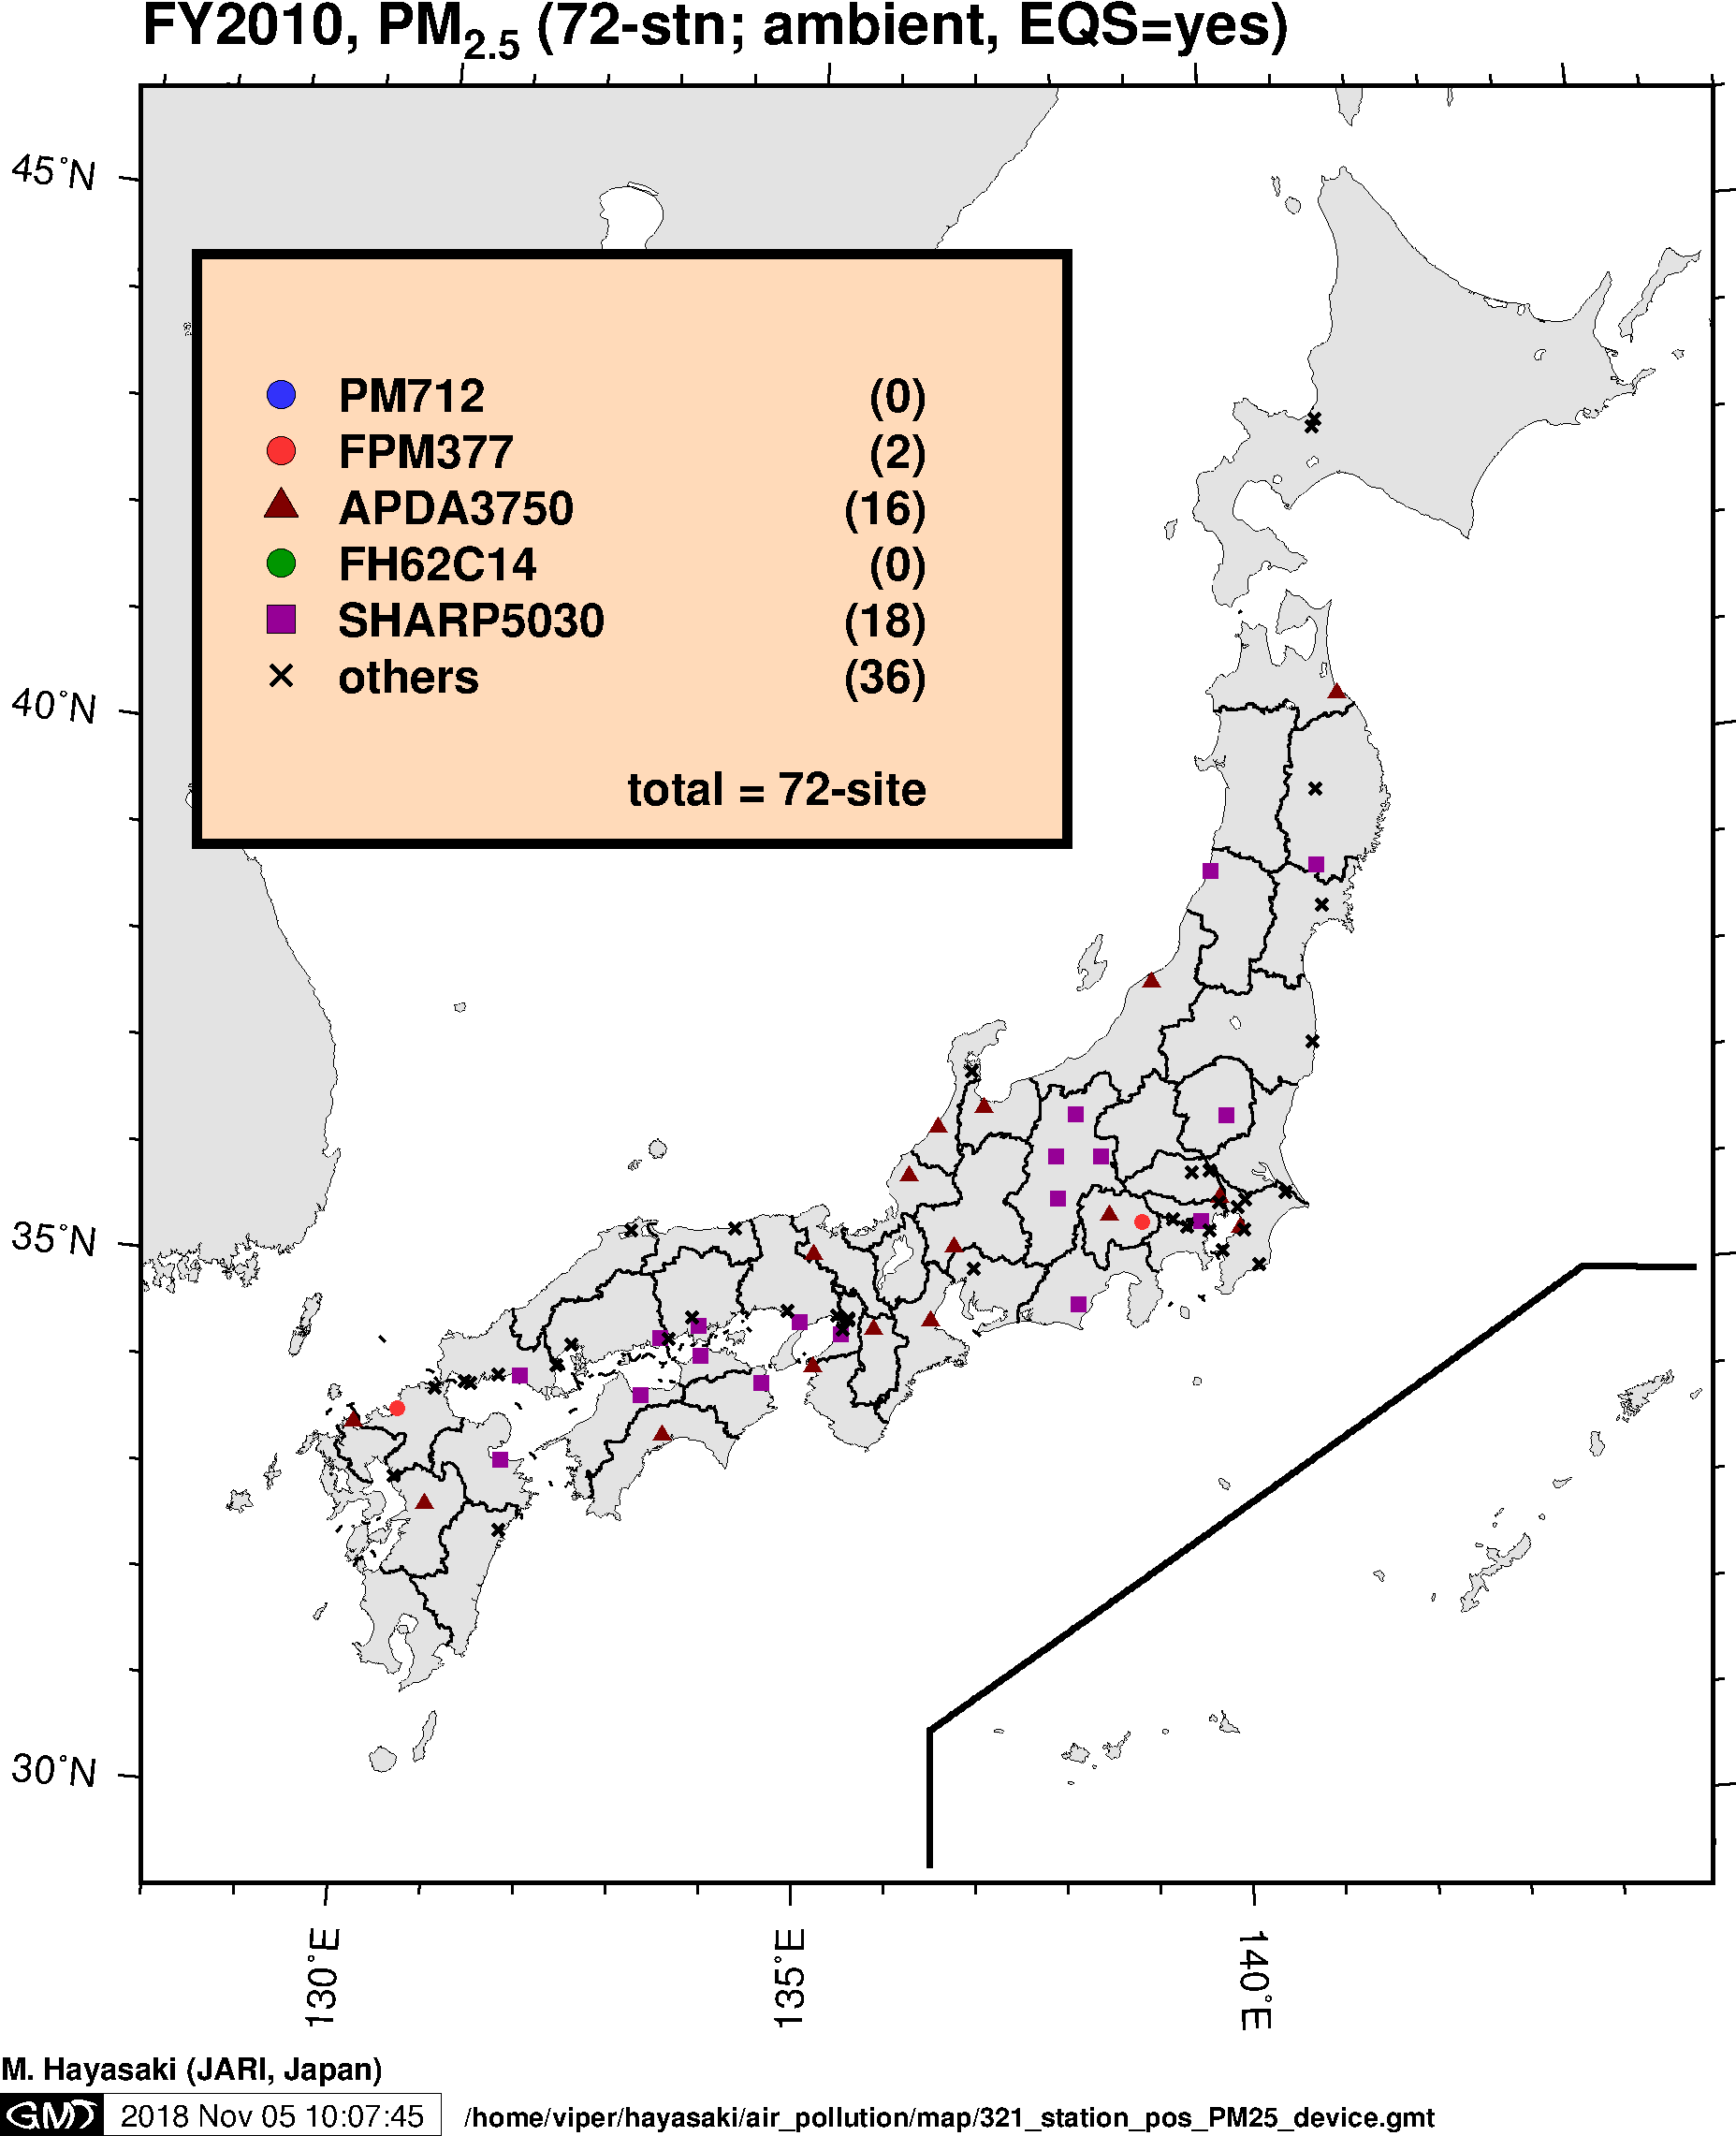 PM2.5 Monitoring devices in Japan (FY2010)